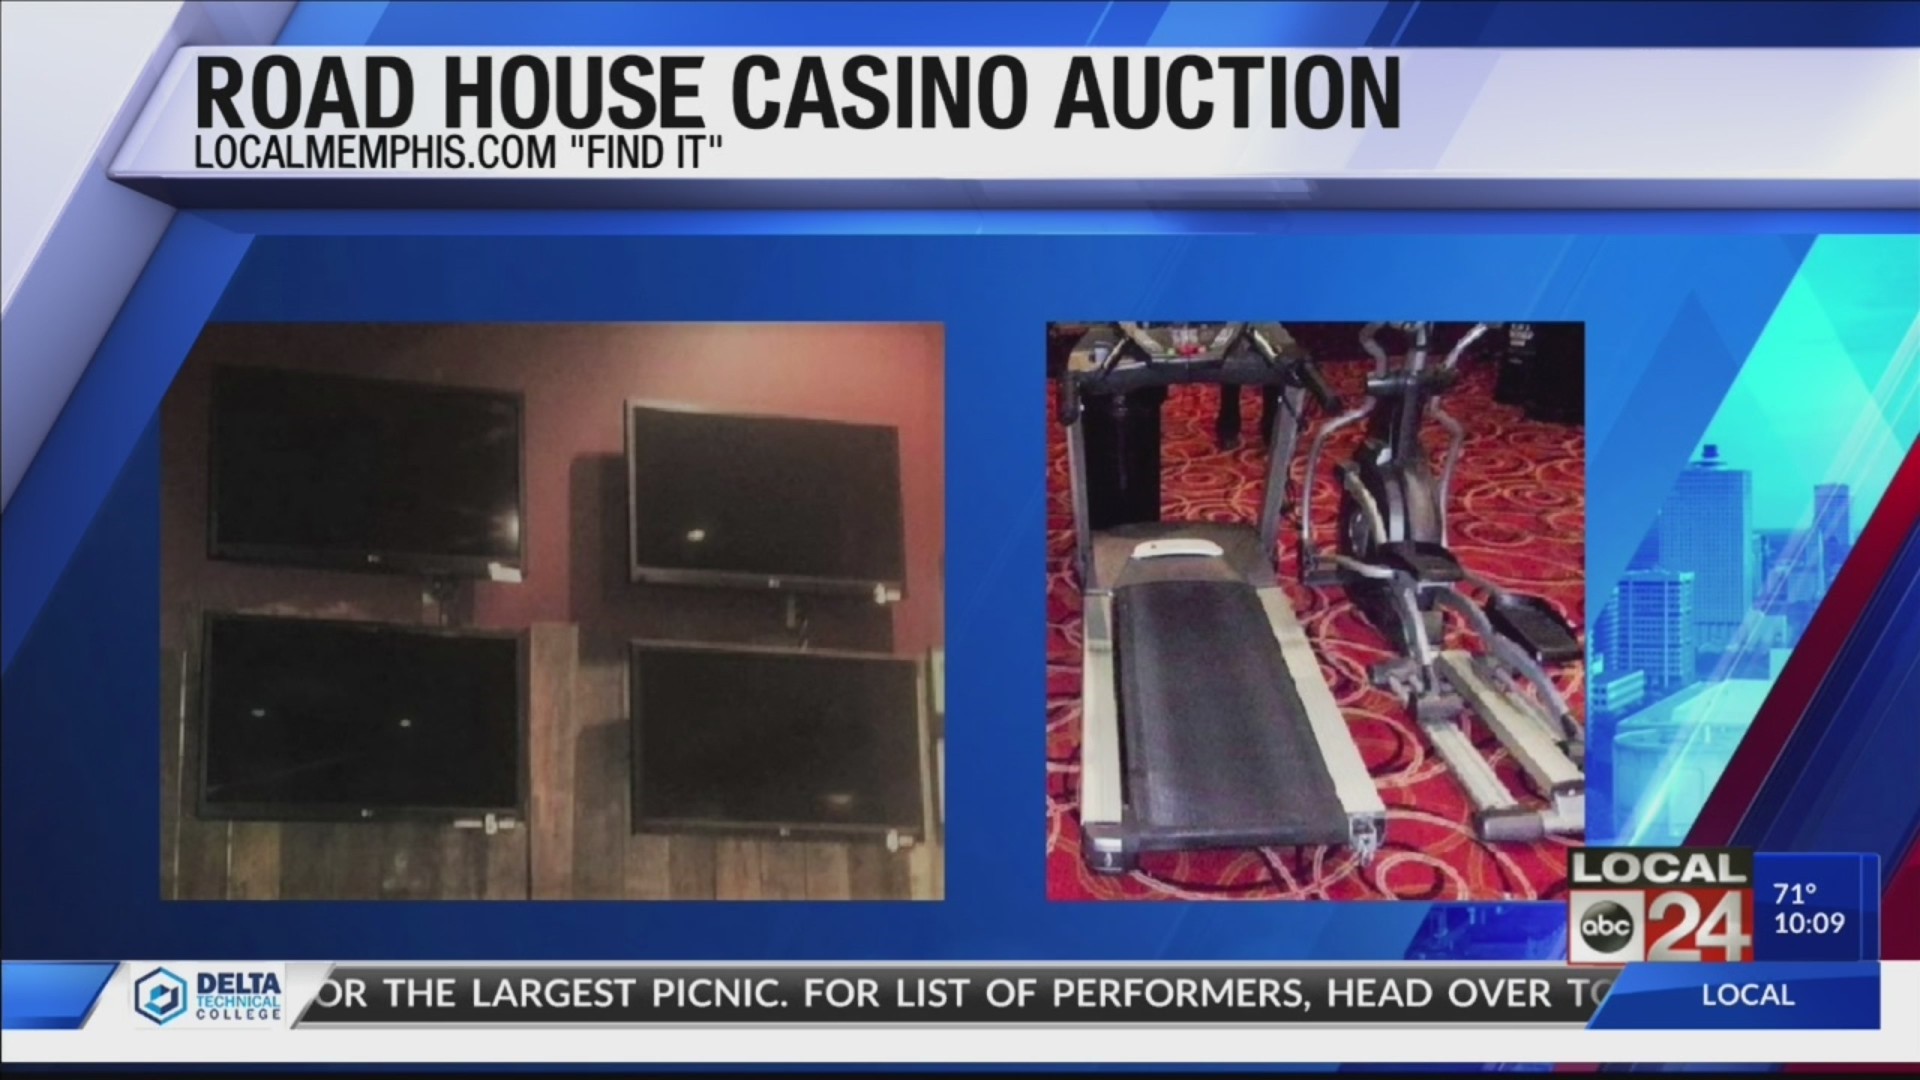 Tunica Roadhouse auction planned for Saturday, May 4th